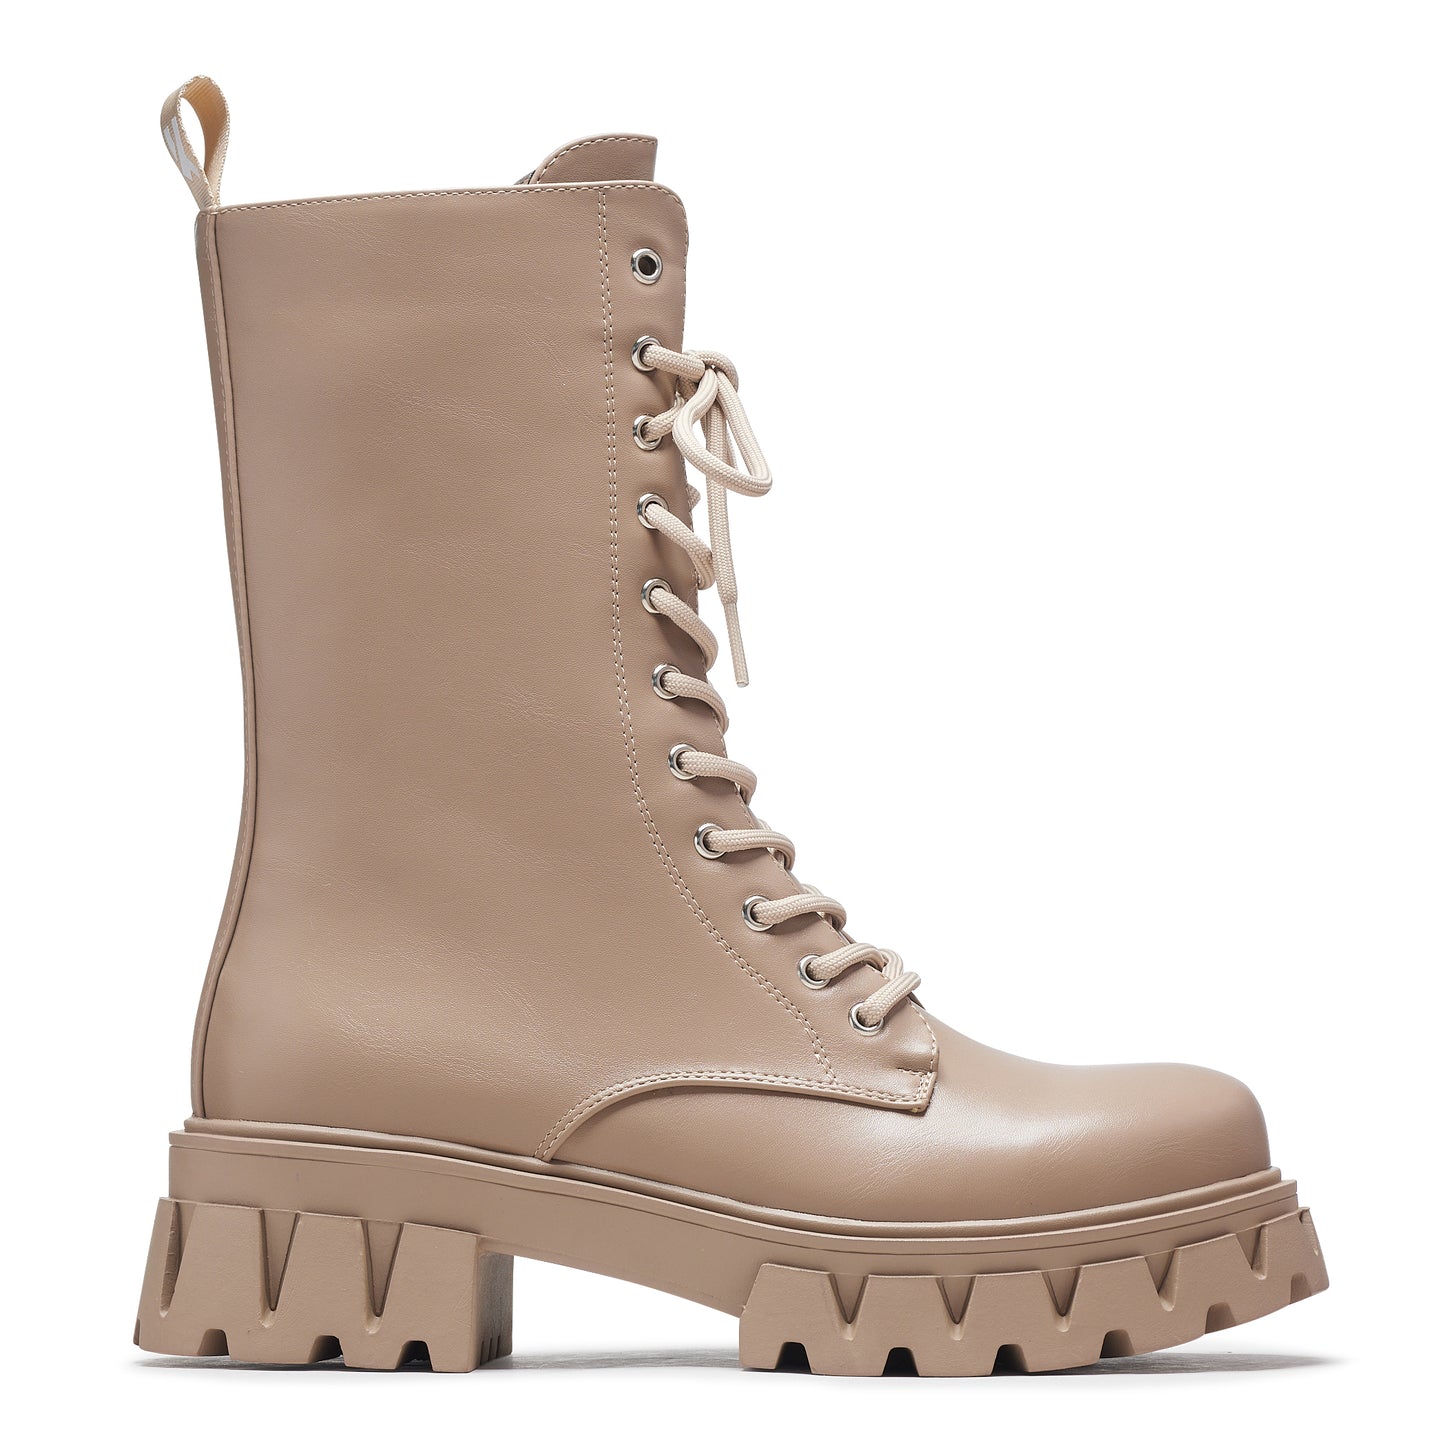 Siren Tall Lace Up Boots - Dust - Ankle Boots - KOI Footwear - Beige - Side View